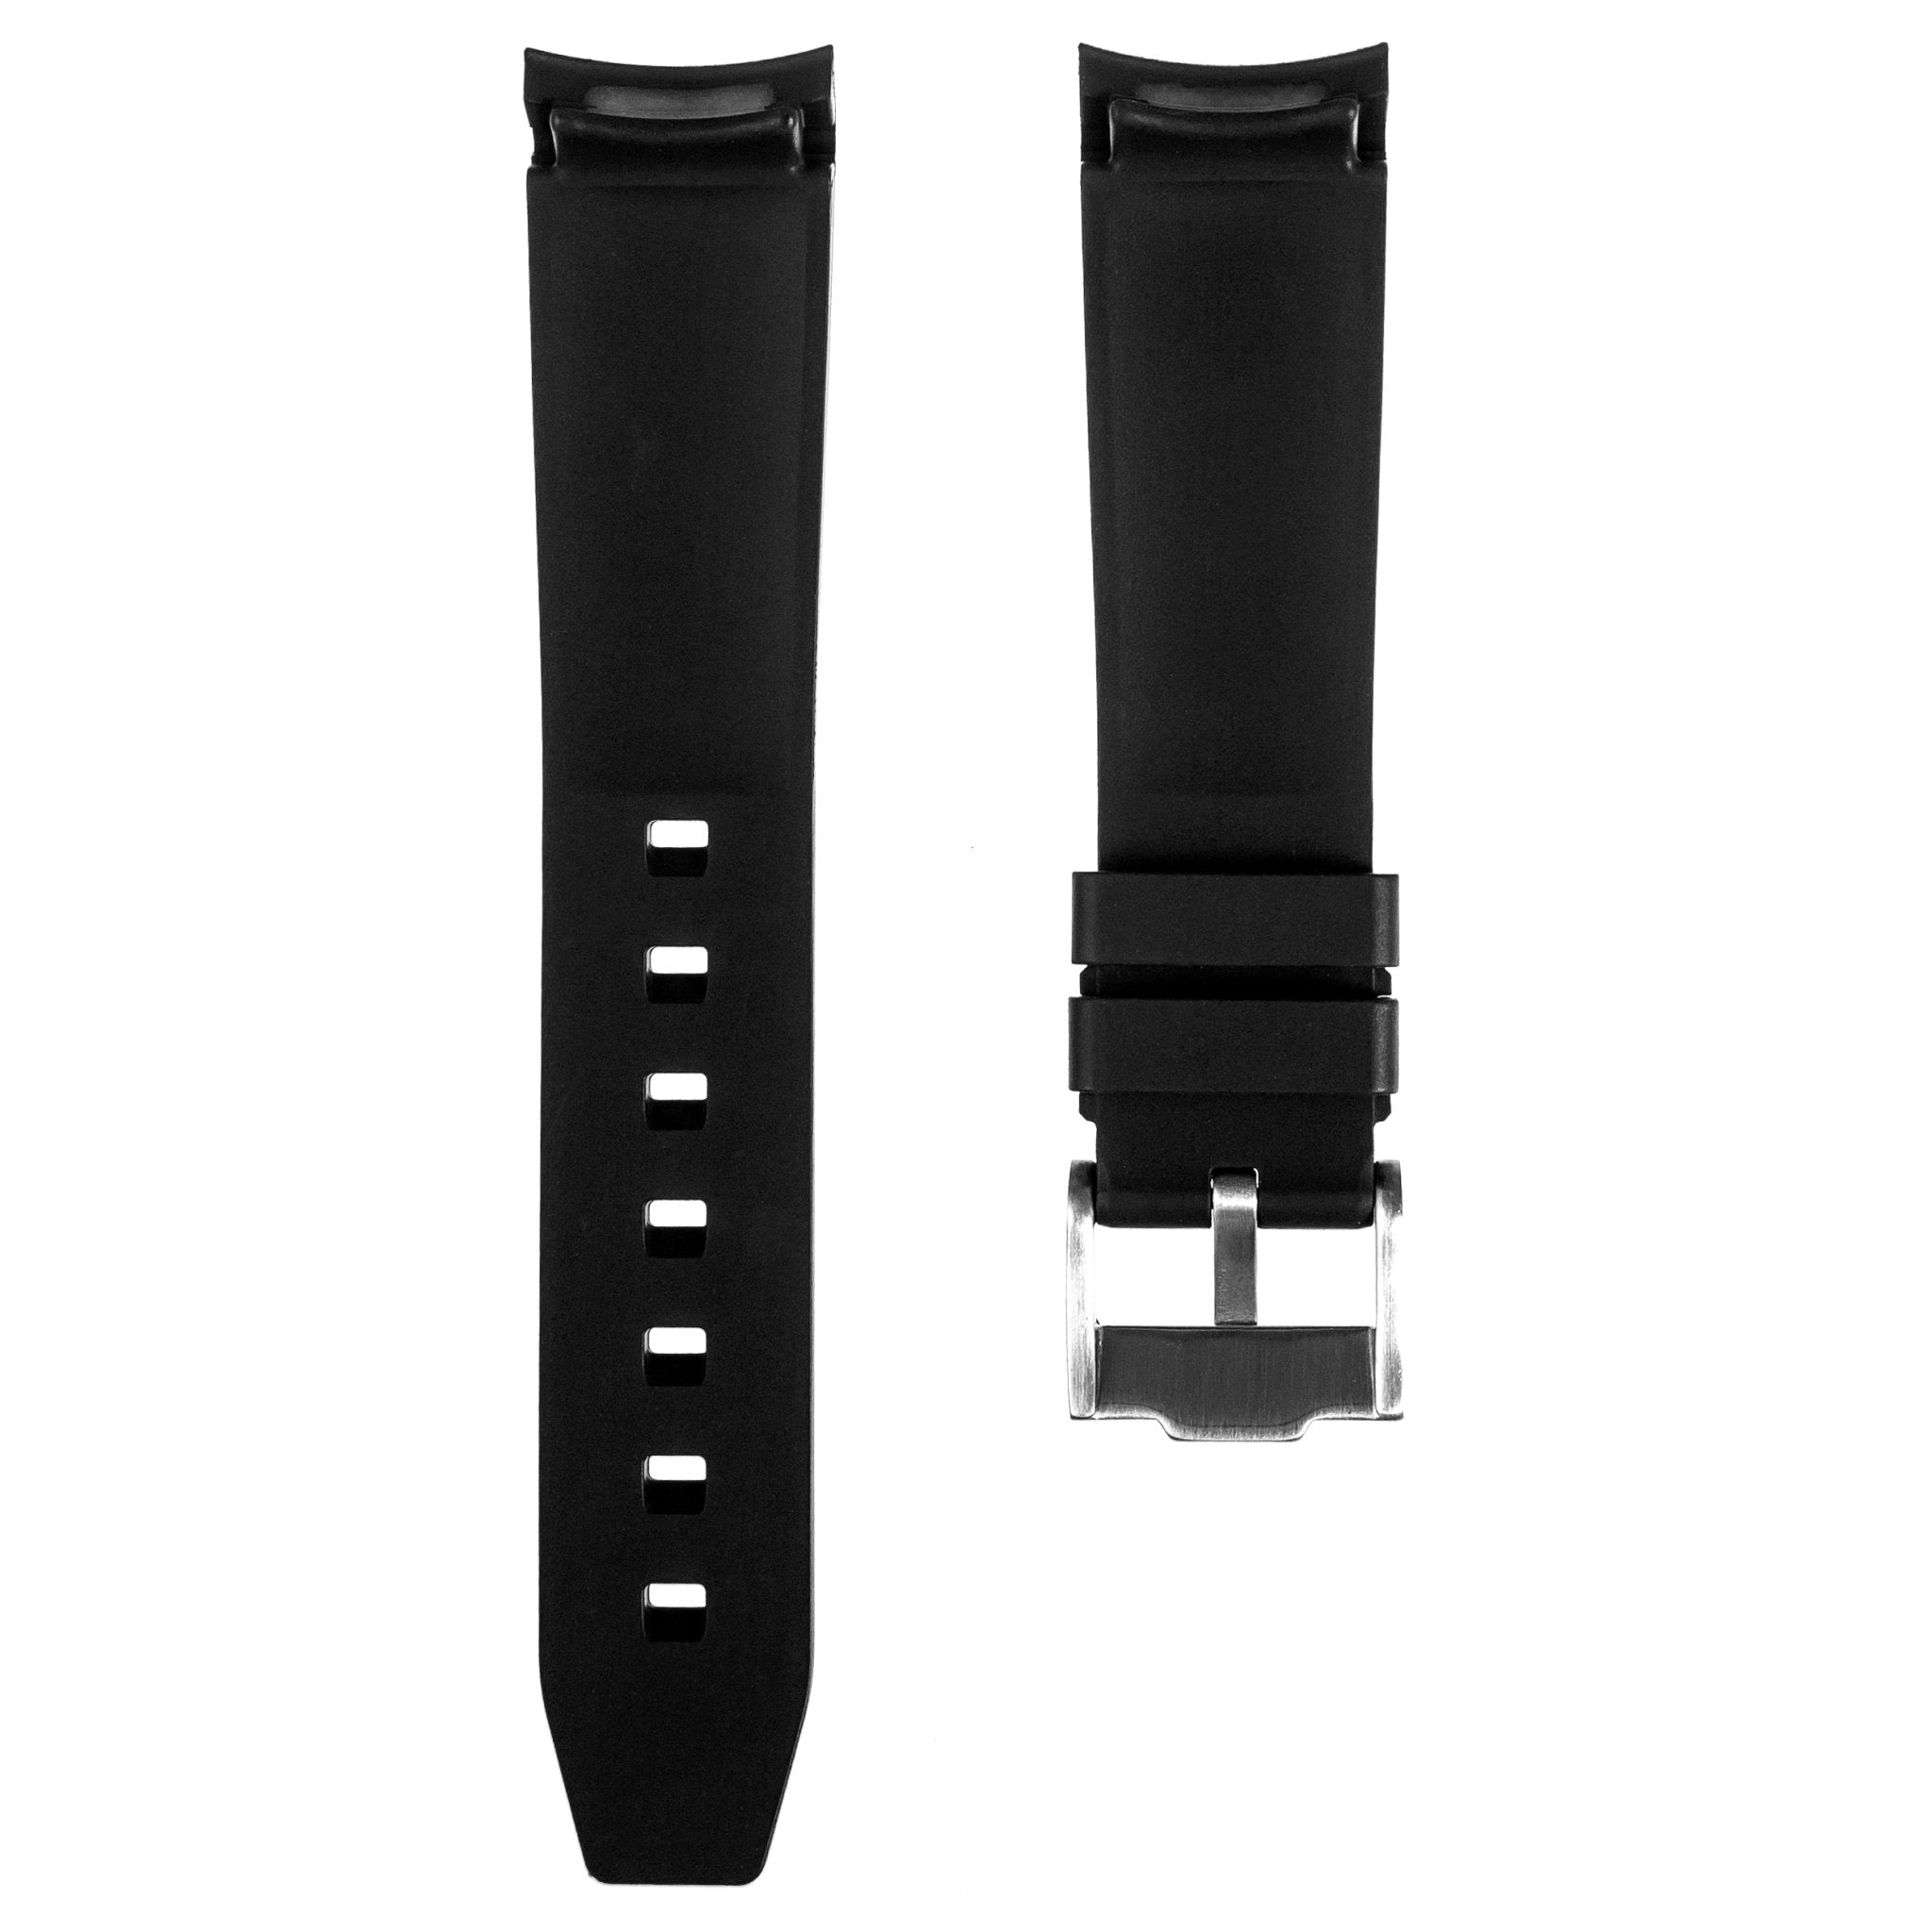 Forge Curved End FKM Rubber Strap – Compatible with Omega X Swatch – Black (2421) -Strapseeker